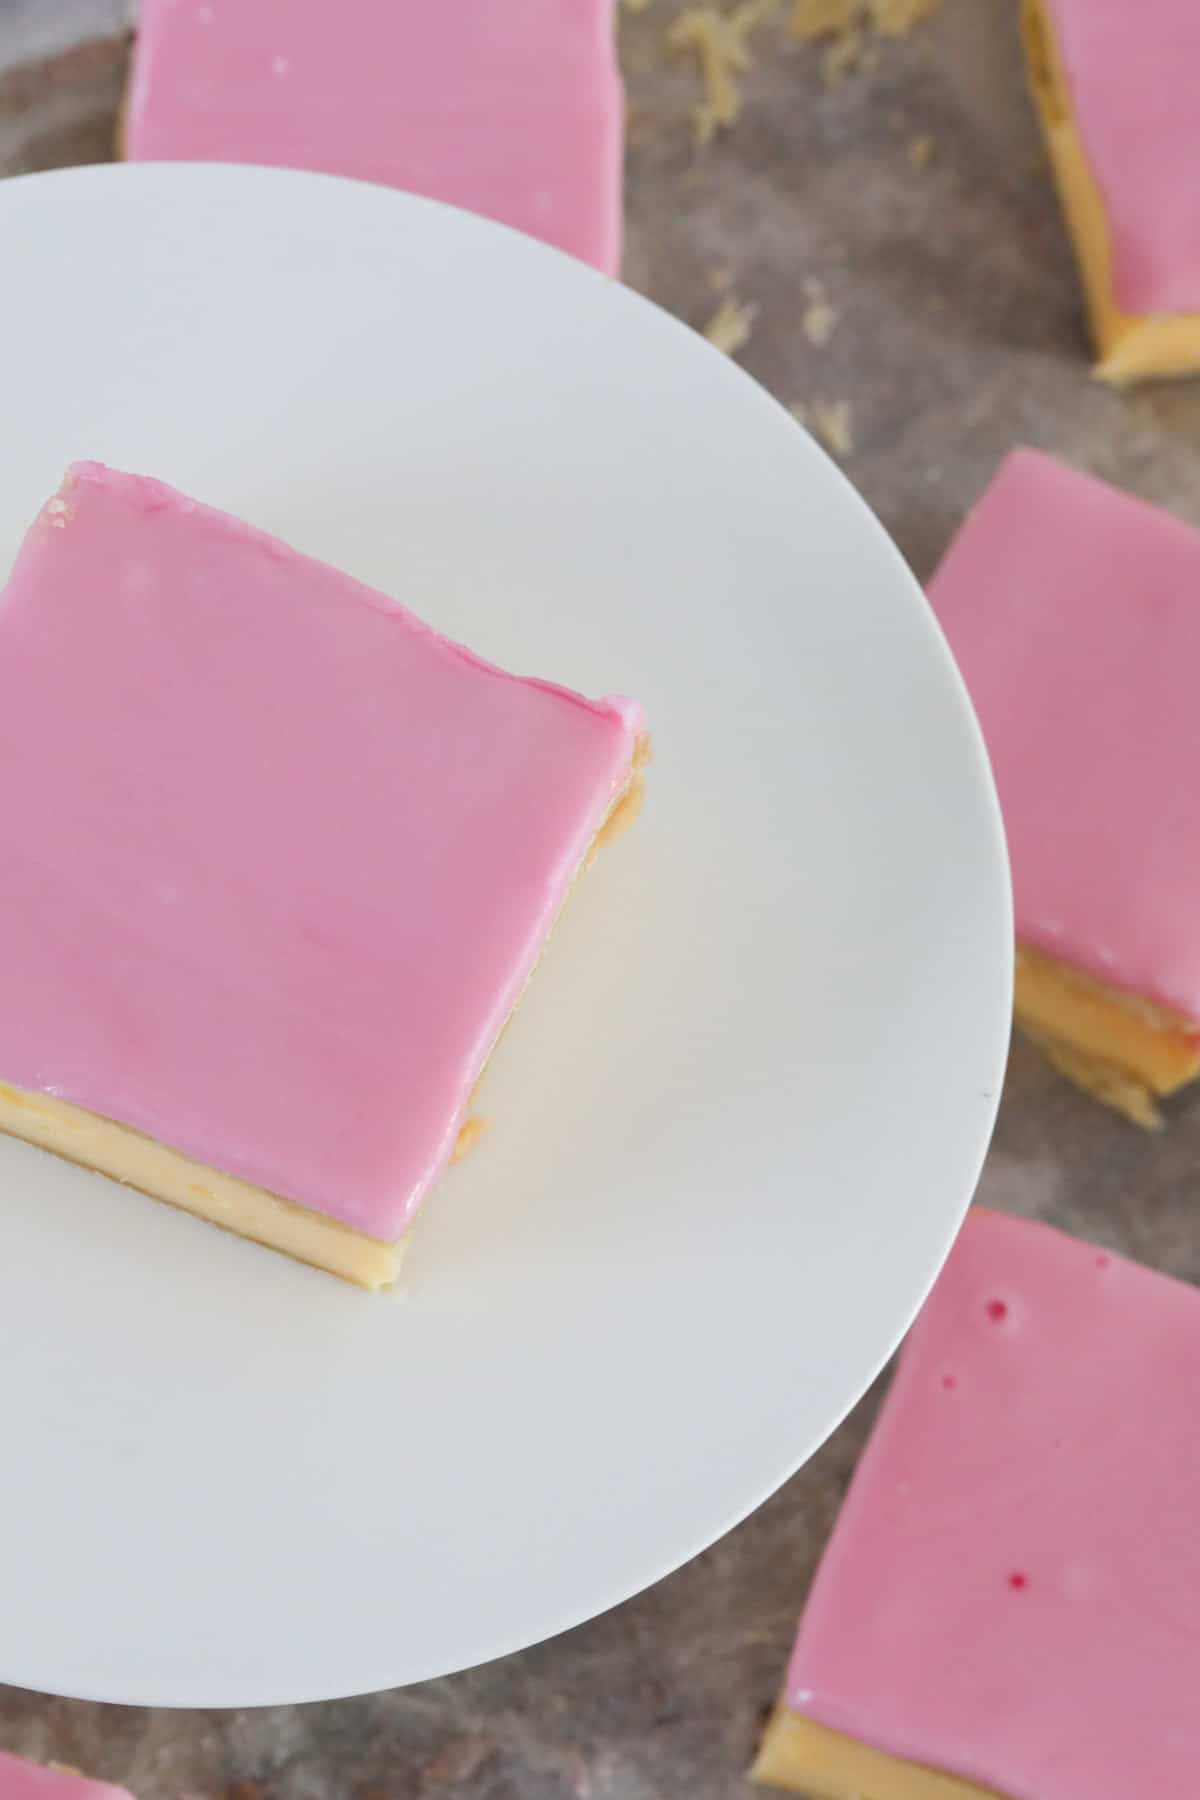 Looking down on pink glaze on top of a vanilla custard slice served on a white plate.